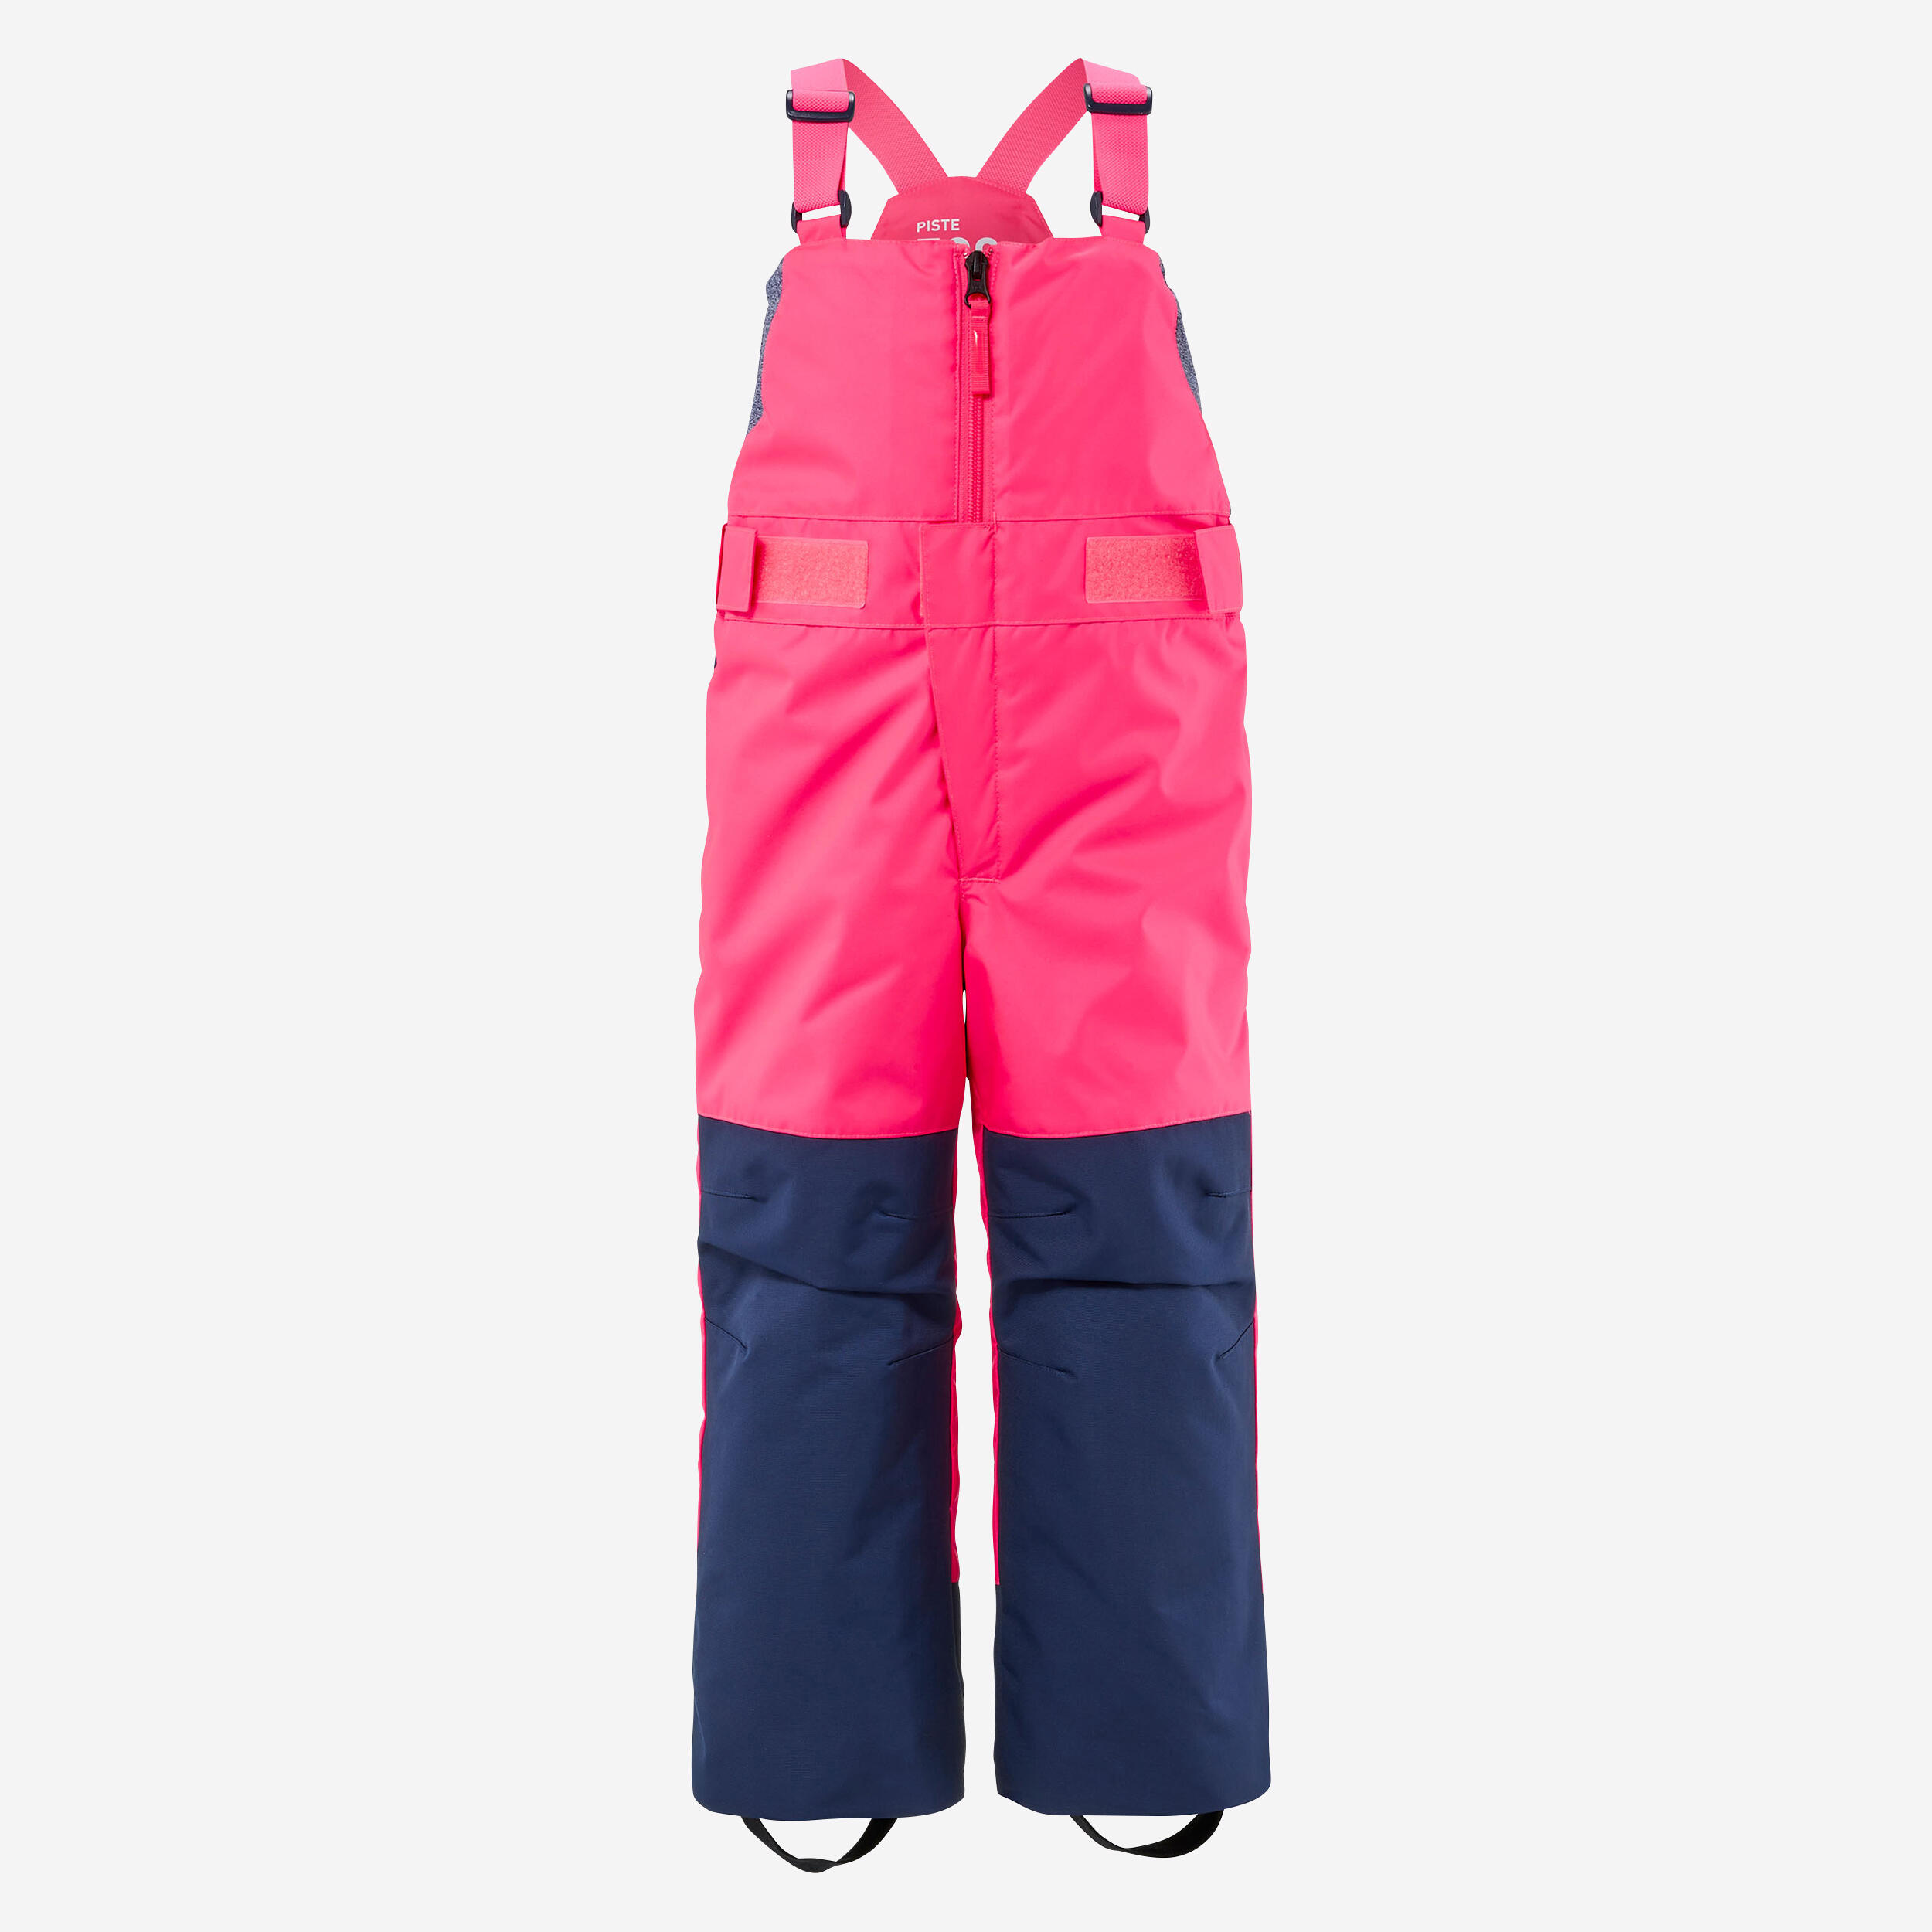 KIDS’ WARM AND WATERPROOF SKI DUNGAREES - 500 PNF - NEON PINK AND NAVY  1/6